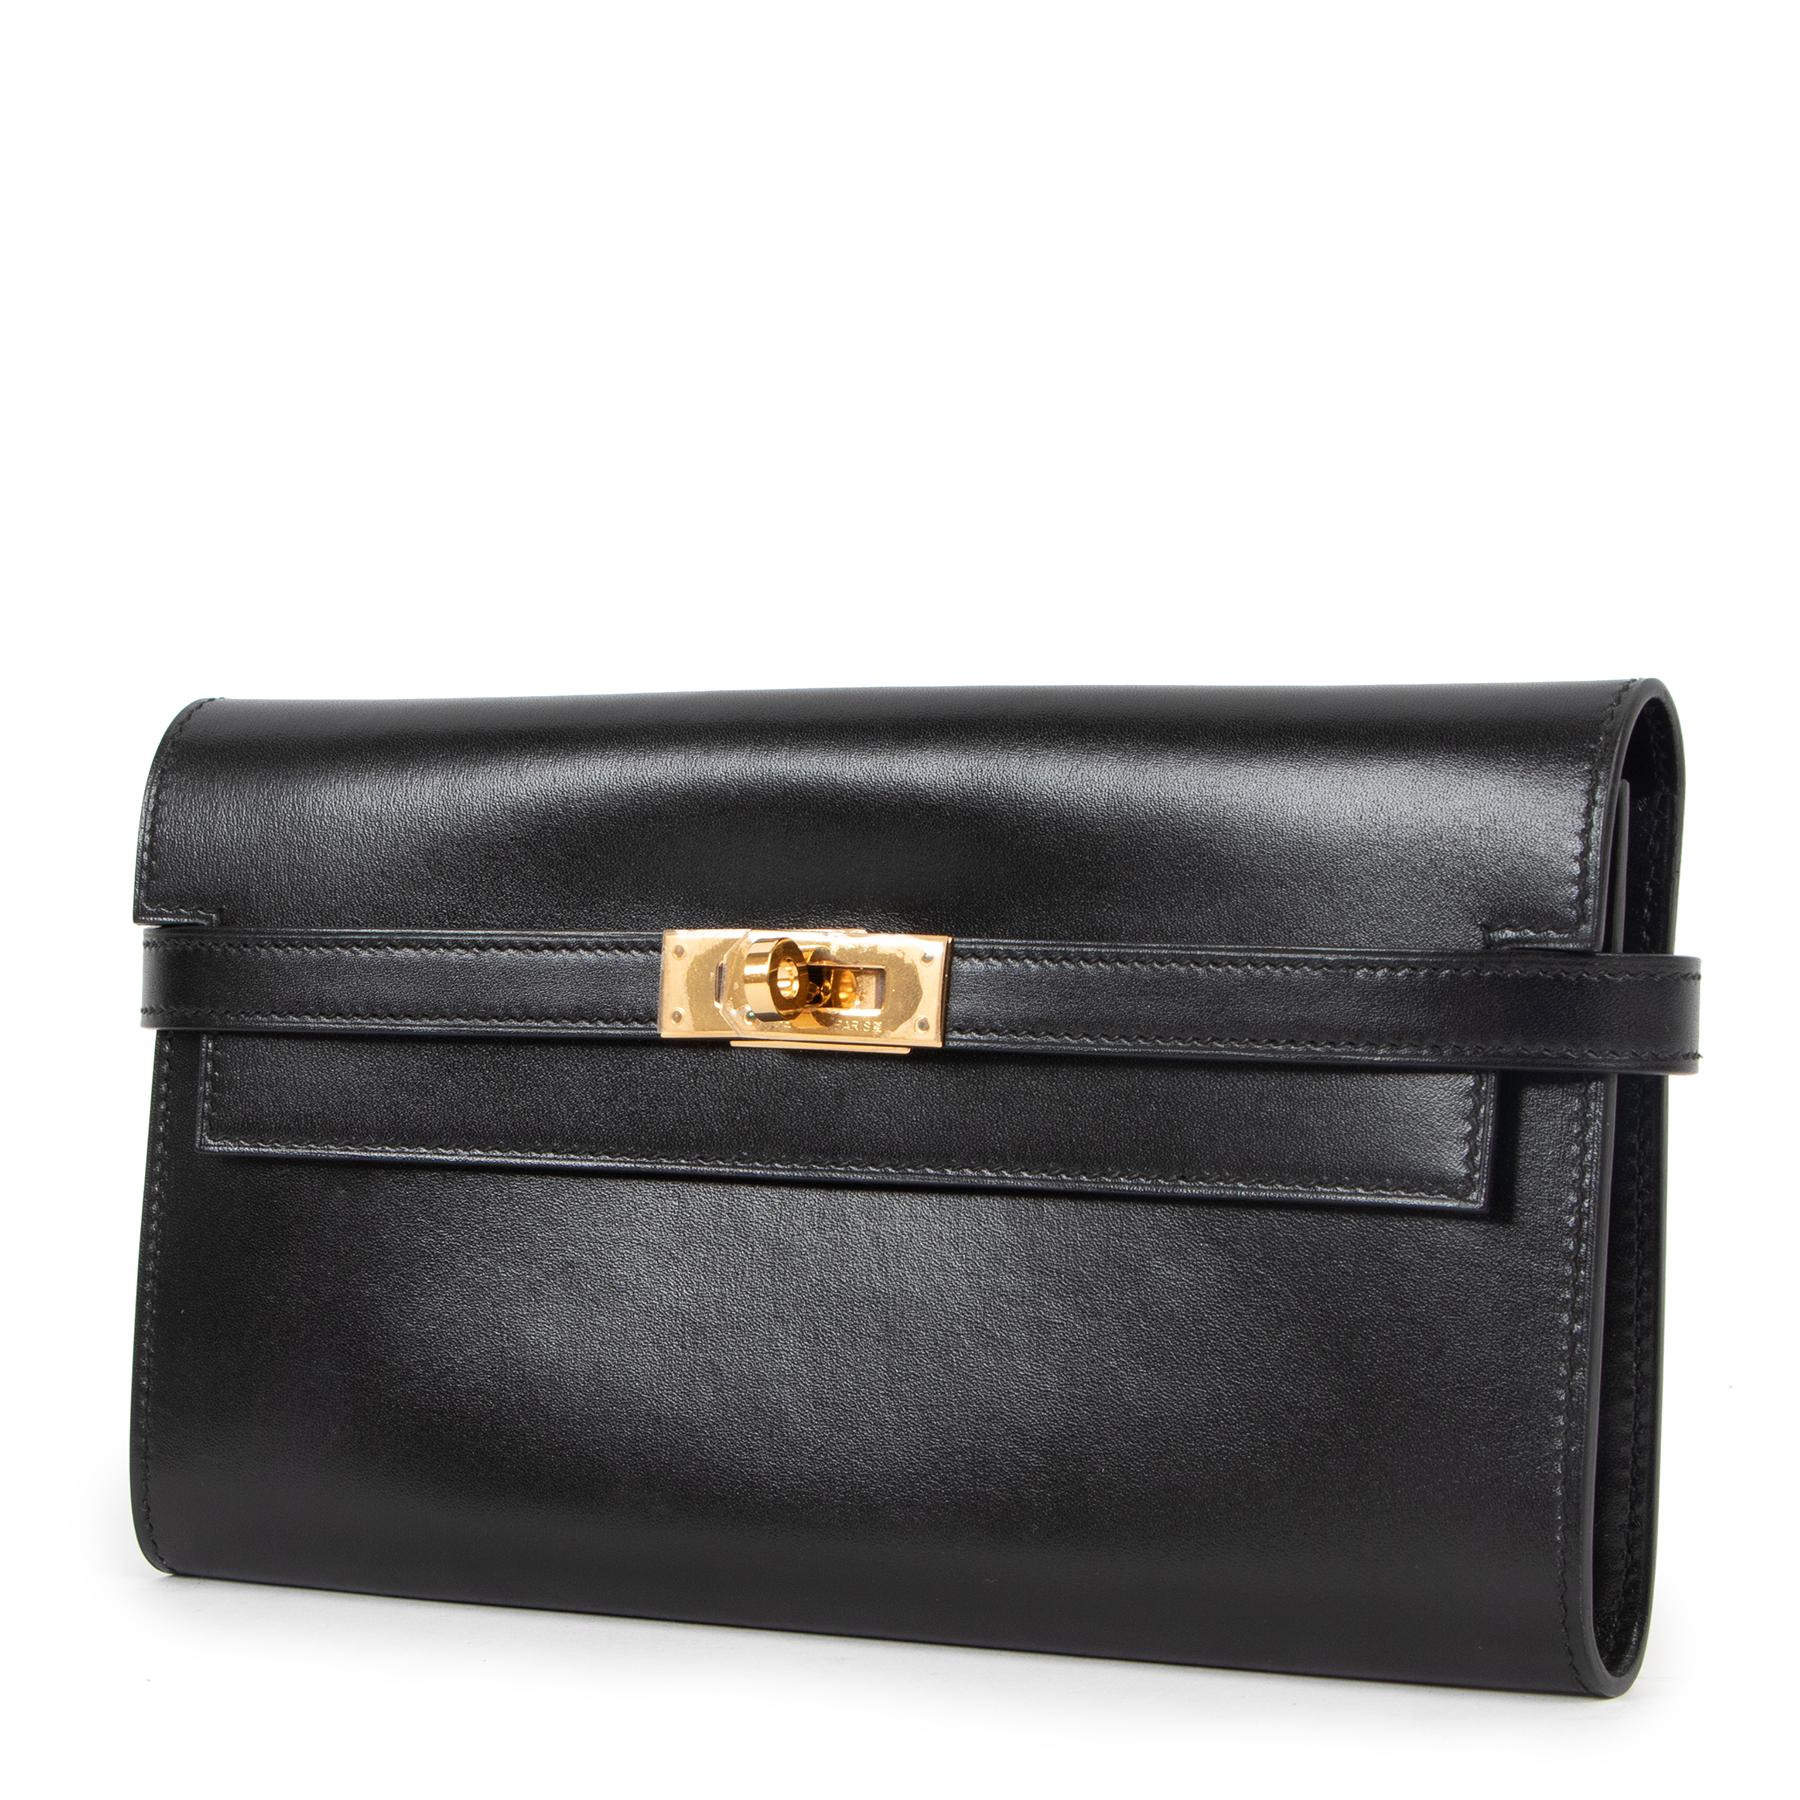 Hermès Kelly Wallet Black Box Calf GHW

We can't get over this Kelly Wallet... What a stunning and timeless piece! Crafted from their prestigious box calf leather in black and this finished with gold-plated hardware. The inside consists of several